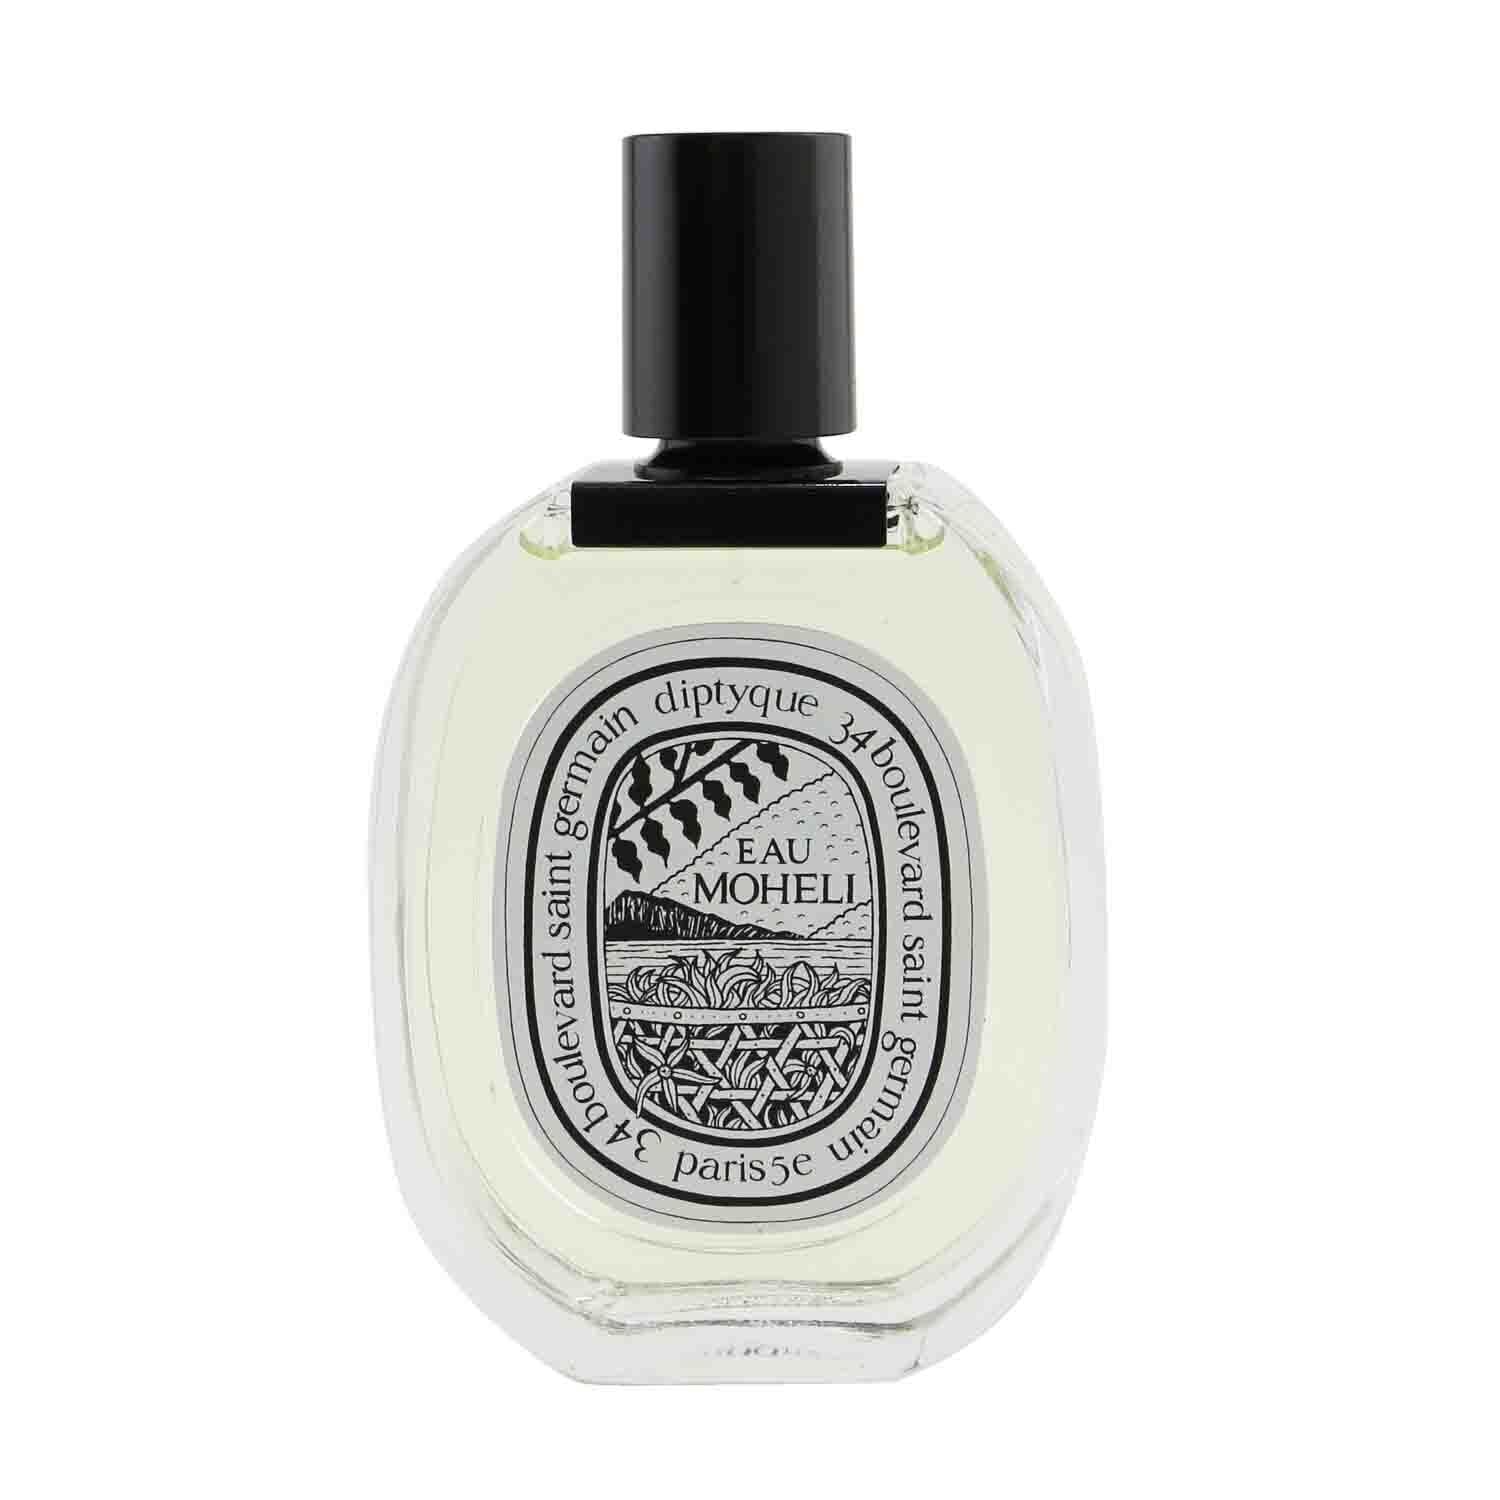 GUESS ゲス マン EDT・SP 75ml 香水 フレグランス GUESS MAN